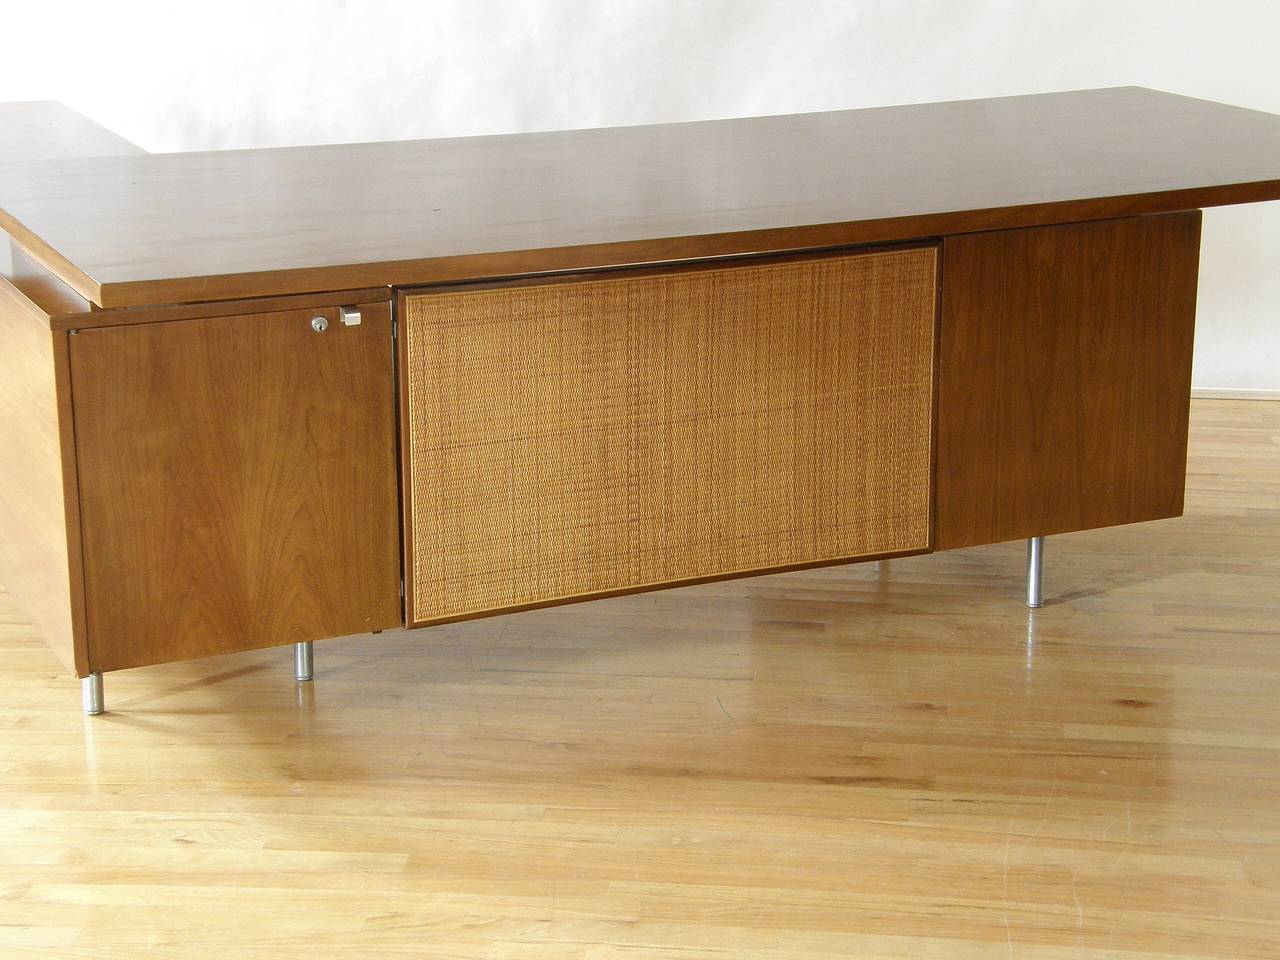 American George Nelson for Herman Miller Executive Desk